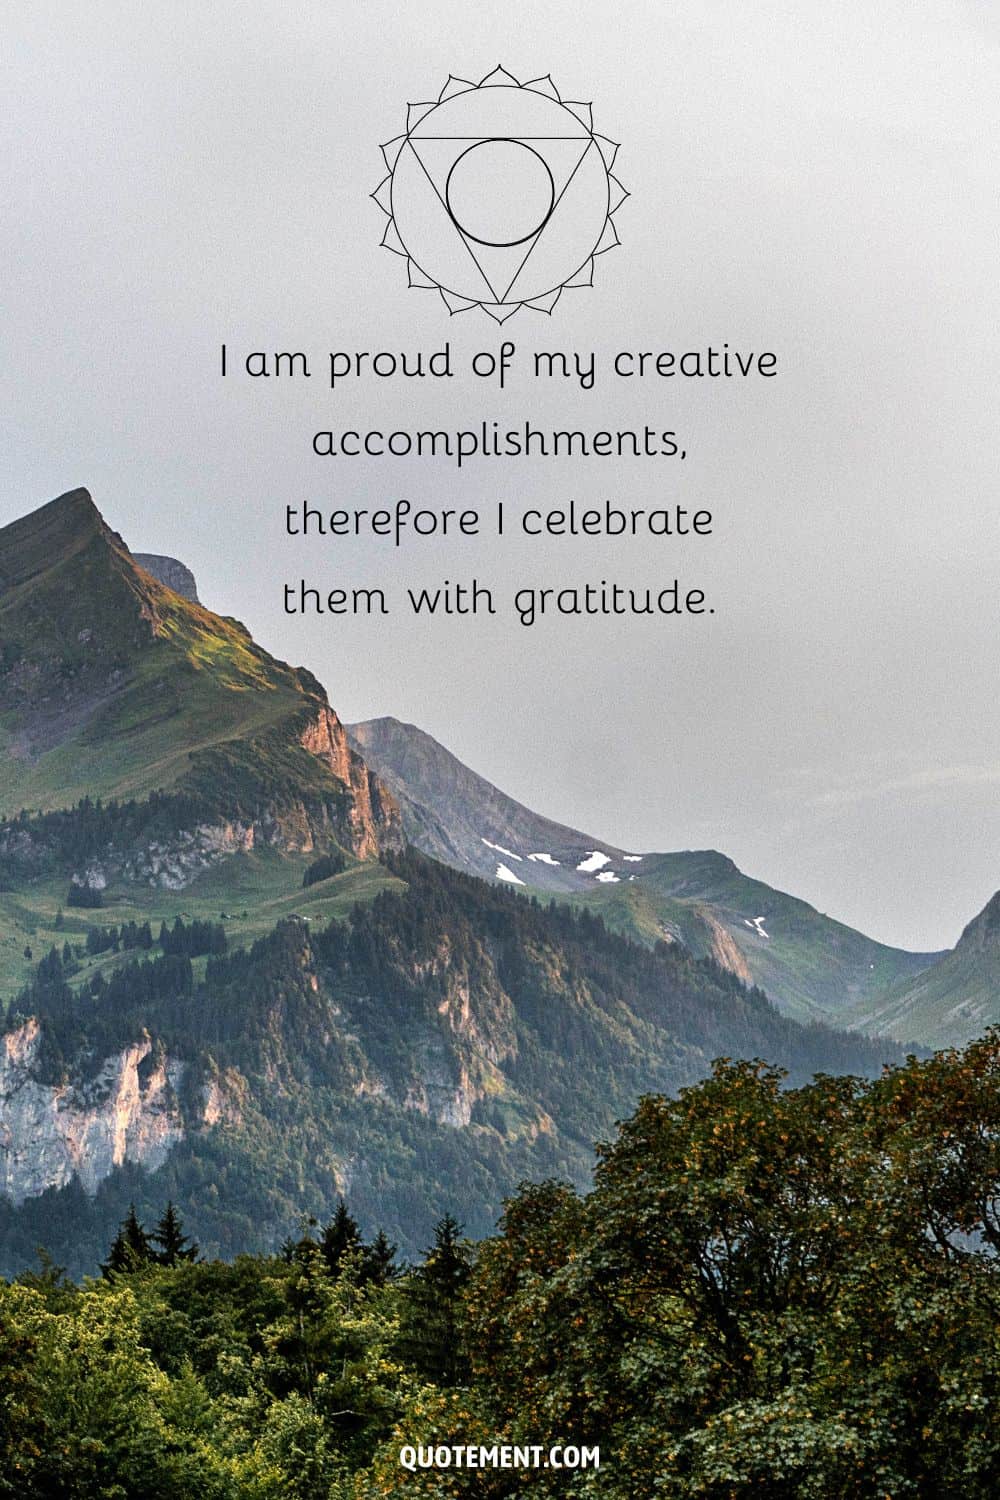 “I am proud of my creative accomplishments, therefore I celebrate them with gratitude.”